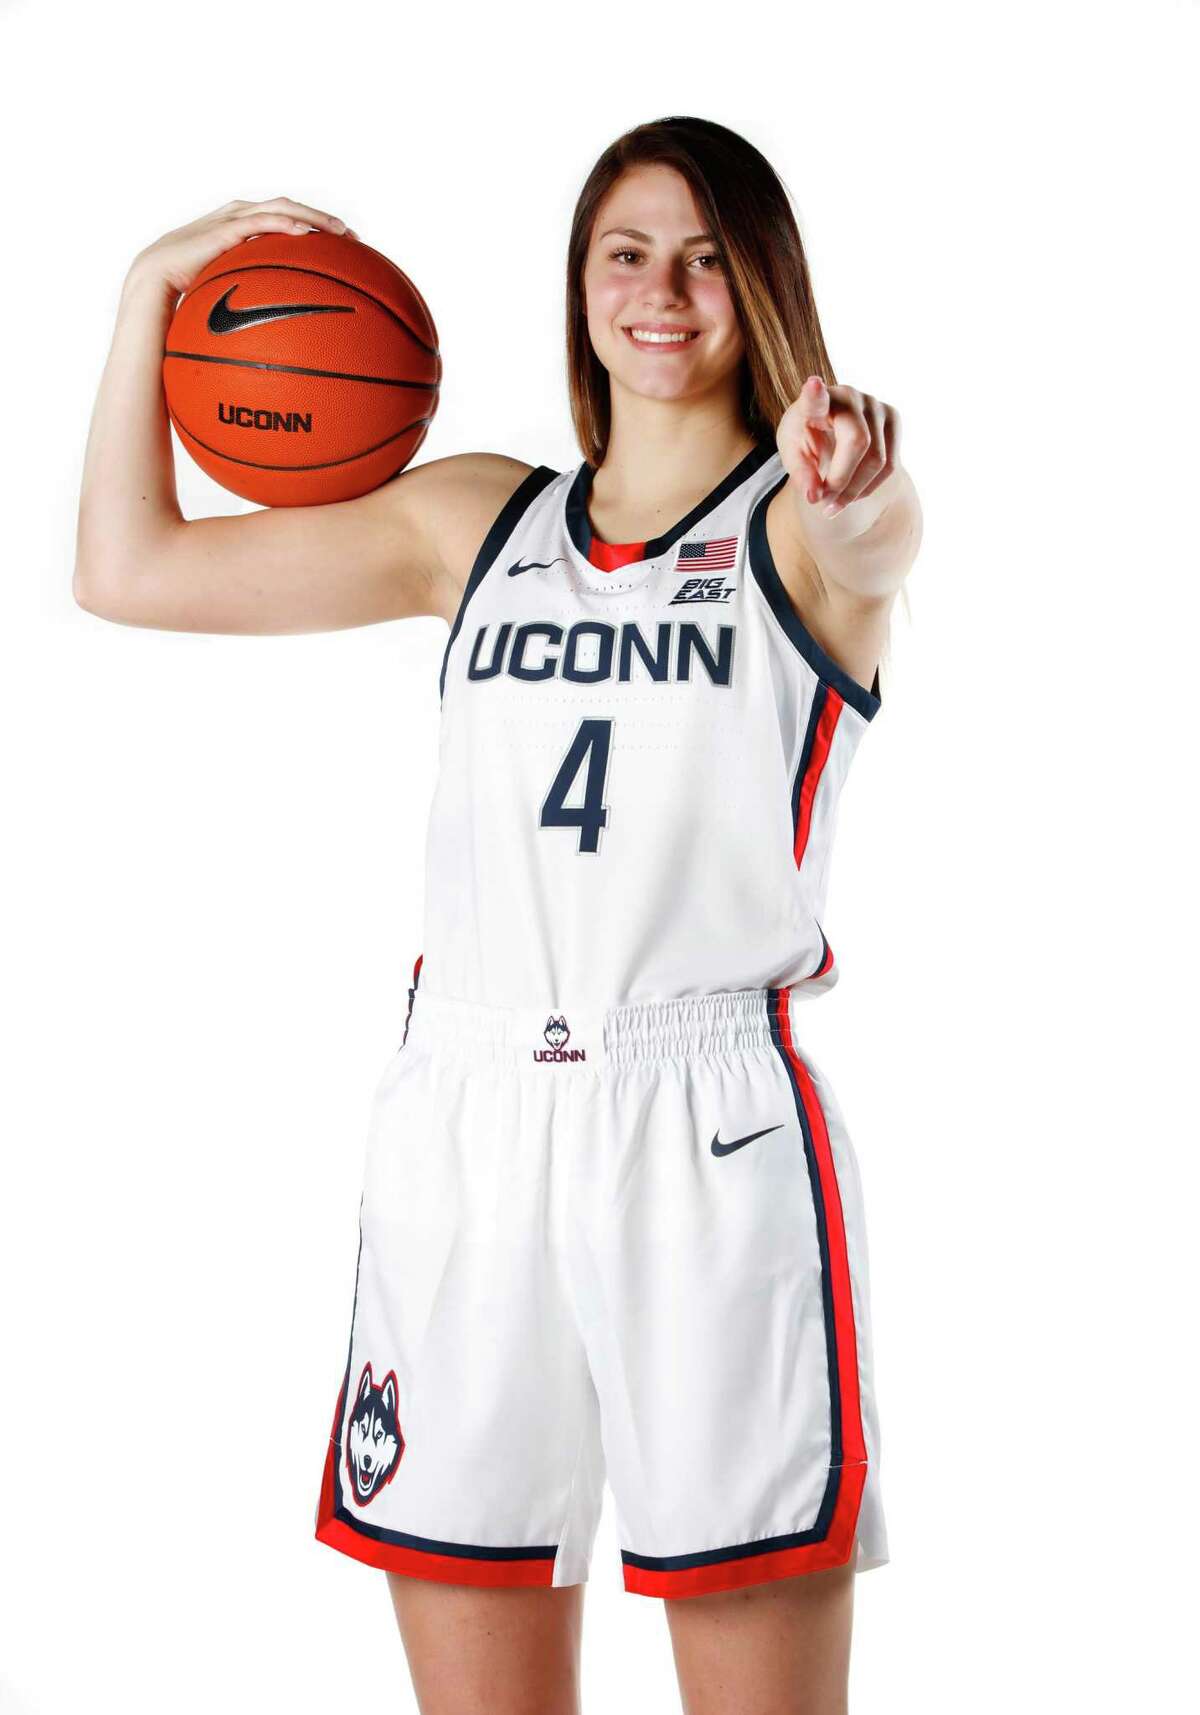 UConn freshman Saylor Poffenbarger is beginning to settle in with the Huskies after joining the women’s basektball team as an early enrollee.